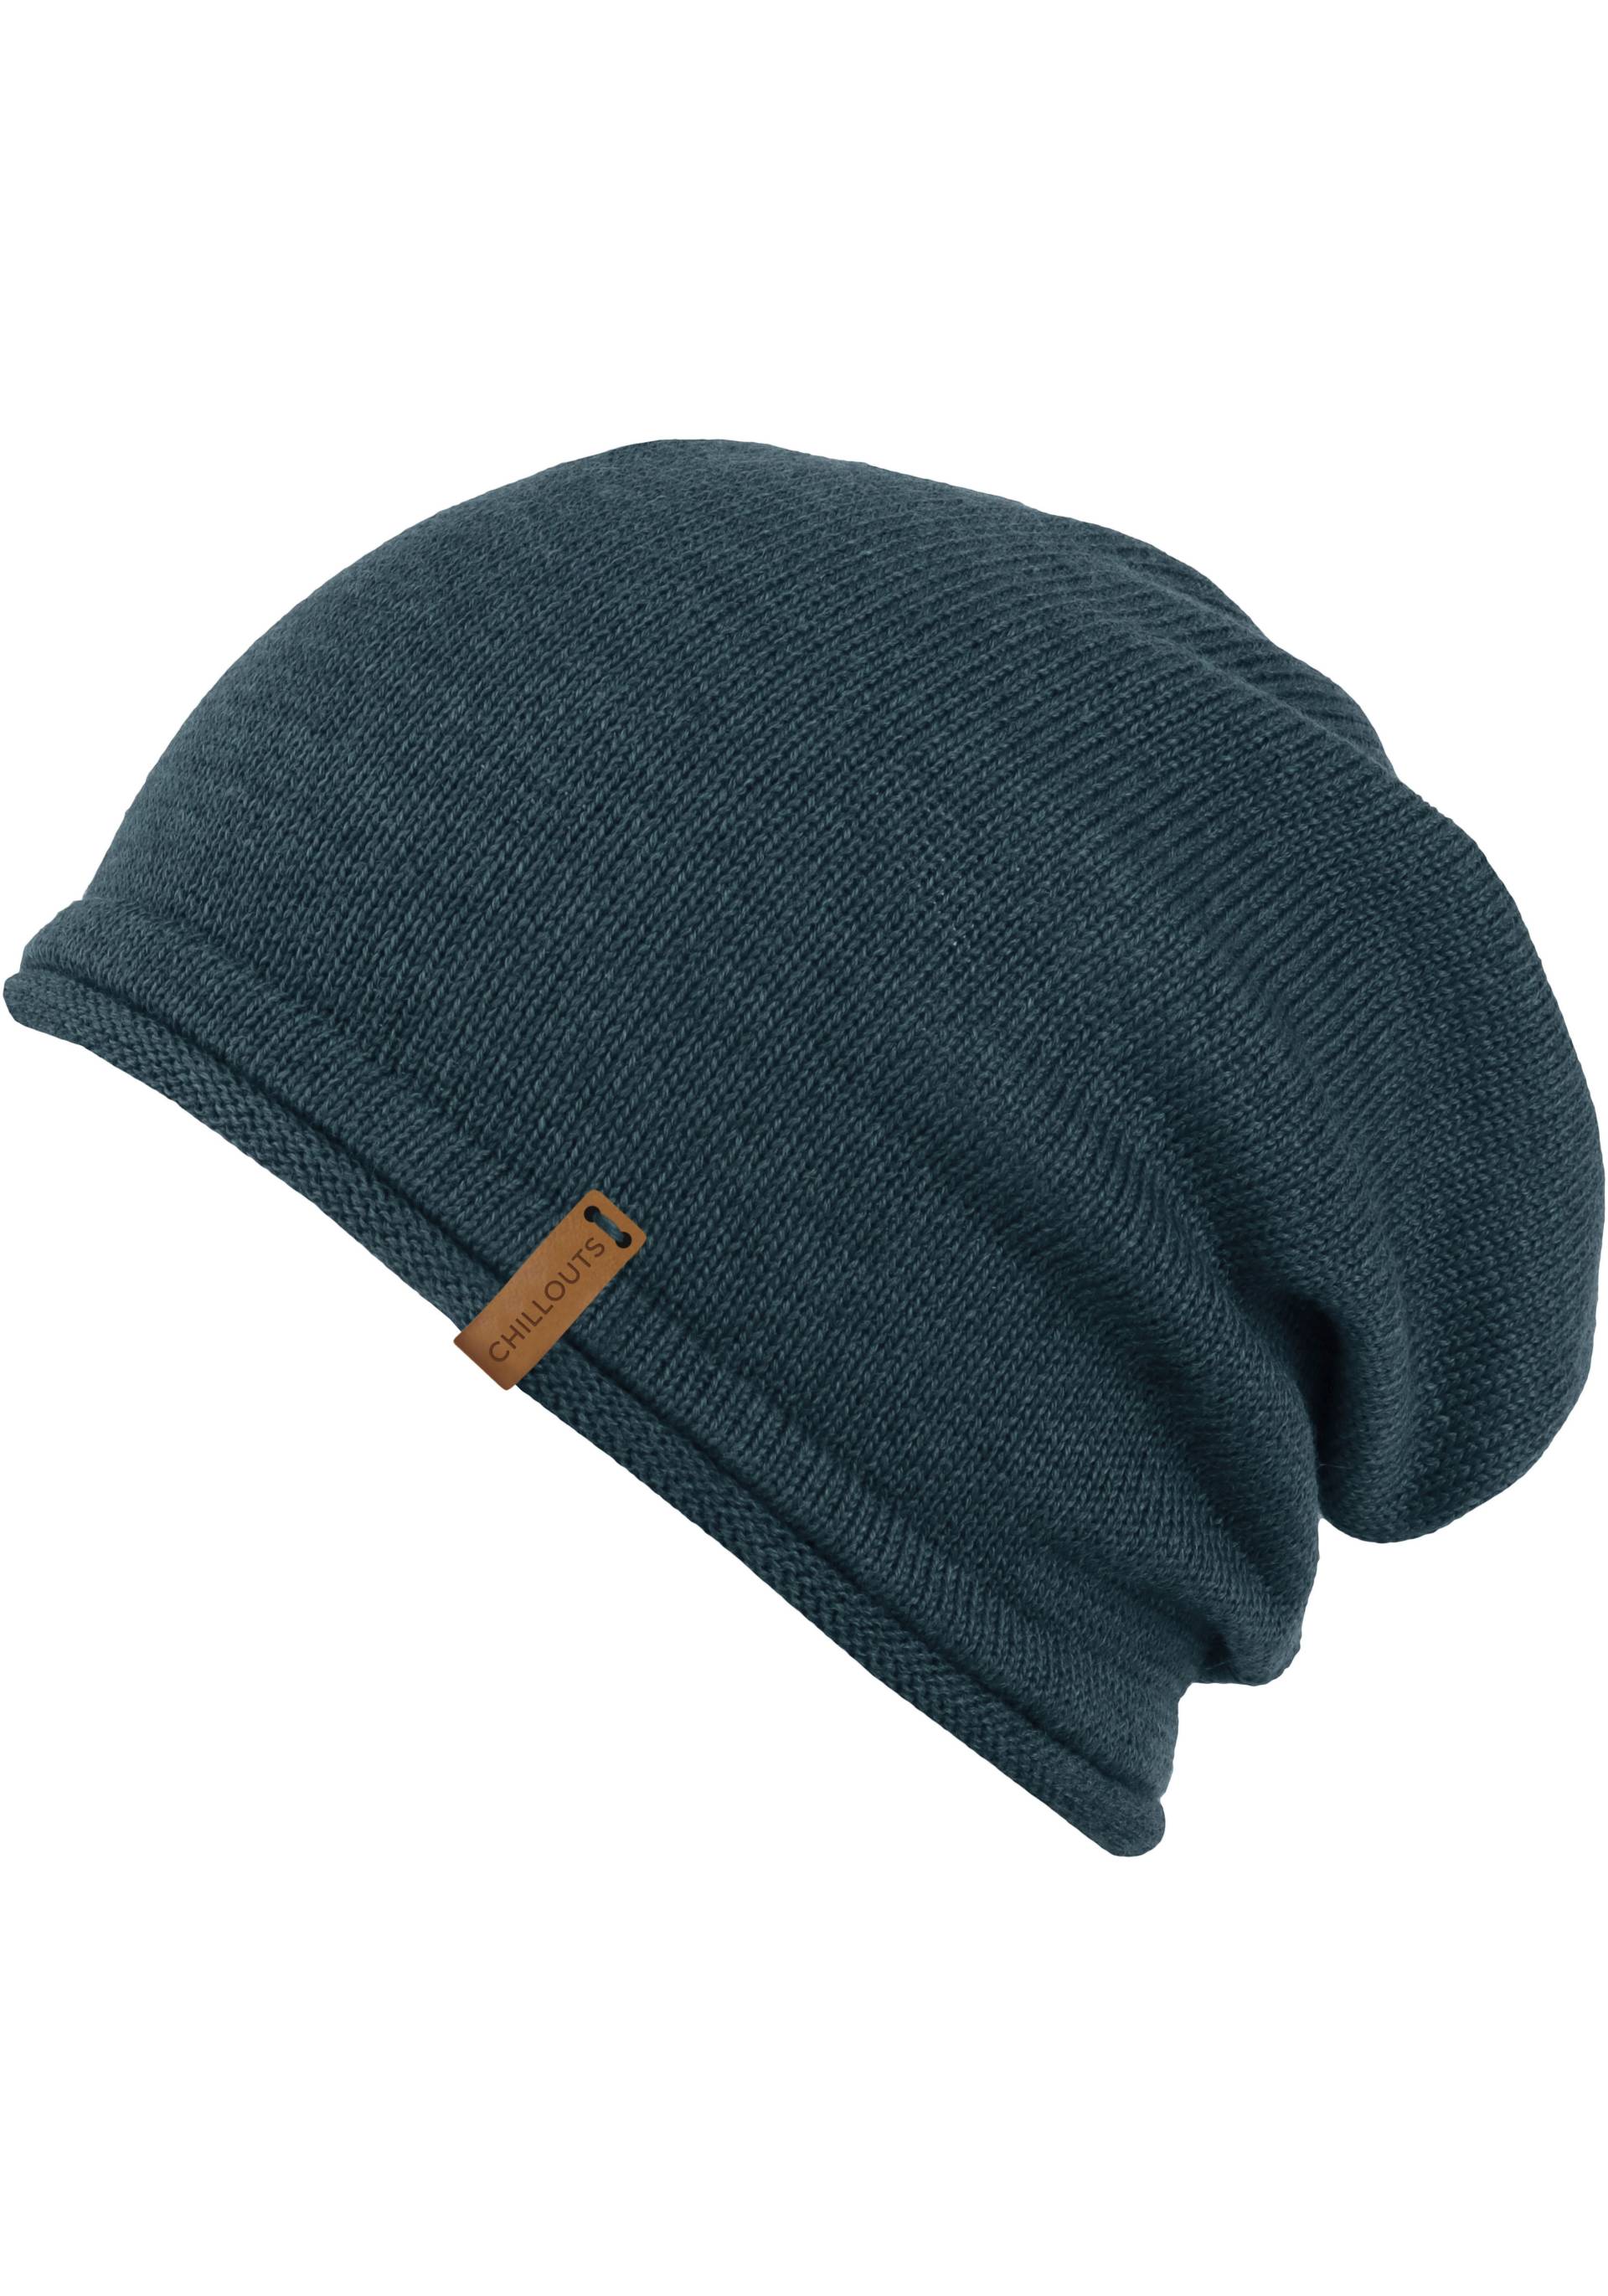 chillouts Beanie »Leicester Hat« von chillouts